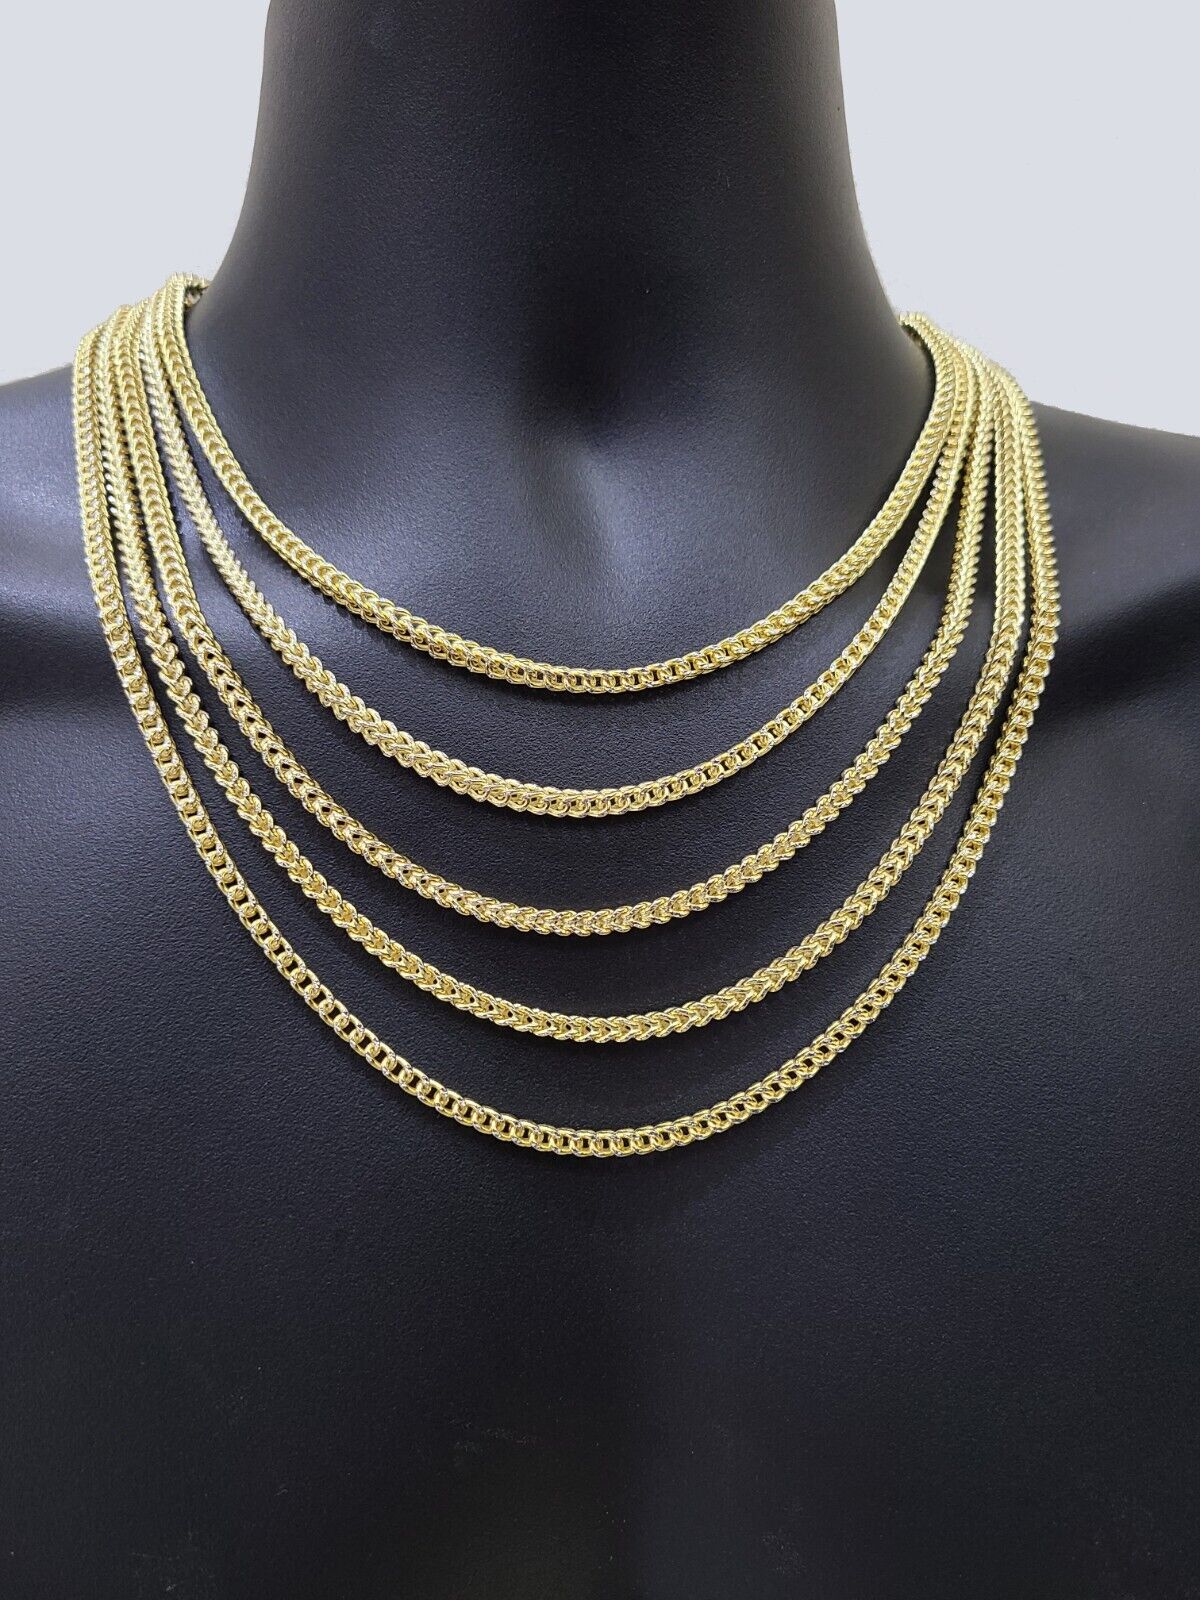 14K Gold Plated Sterling Silver 2MM Franco Chain Necklaces, Solid 925  Italy, Next Level Jewelry - Walmart.com